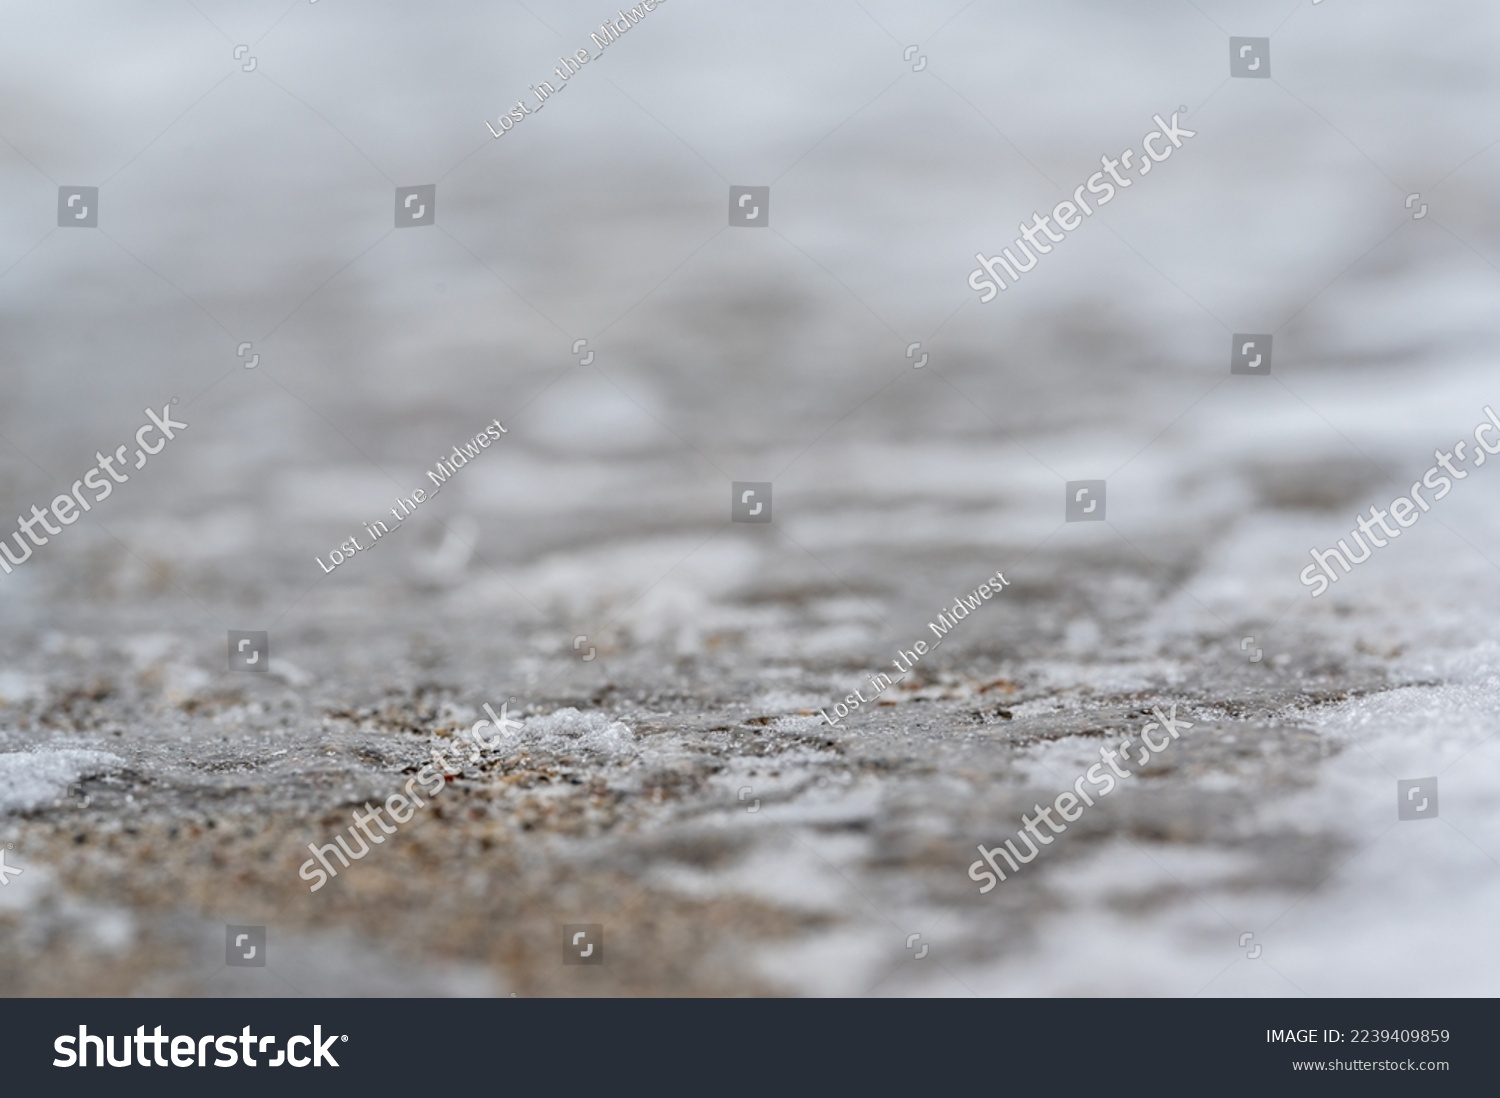 macro ground level closeup view of rock salt ice-melt on concrete with a frozen layer.  #2239409859